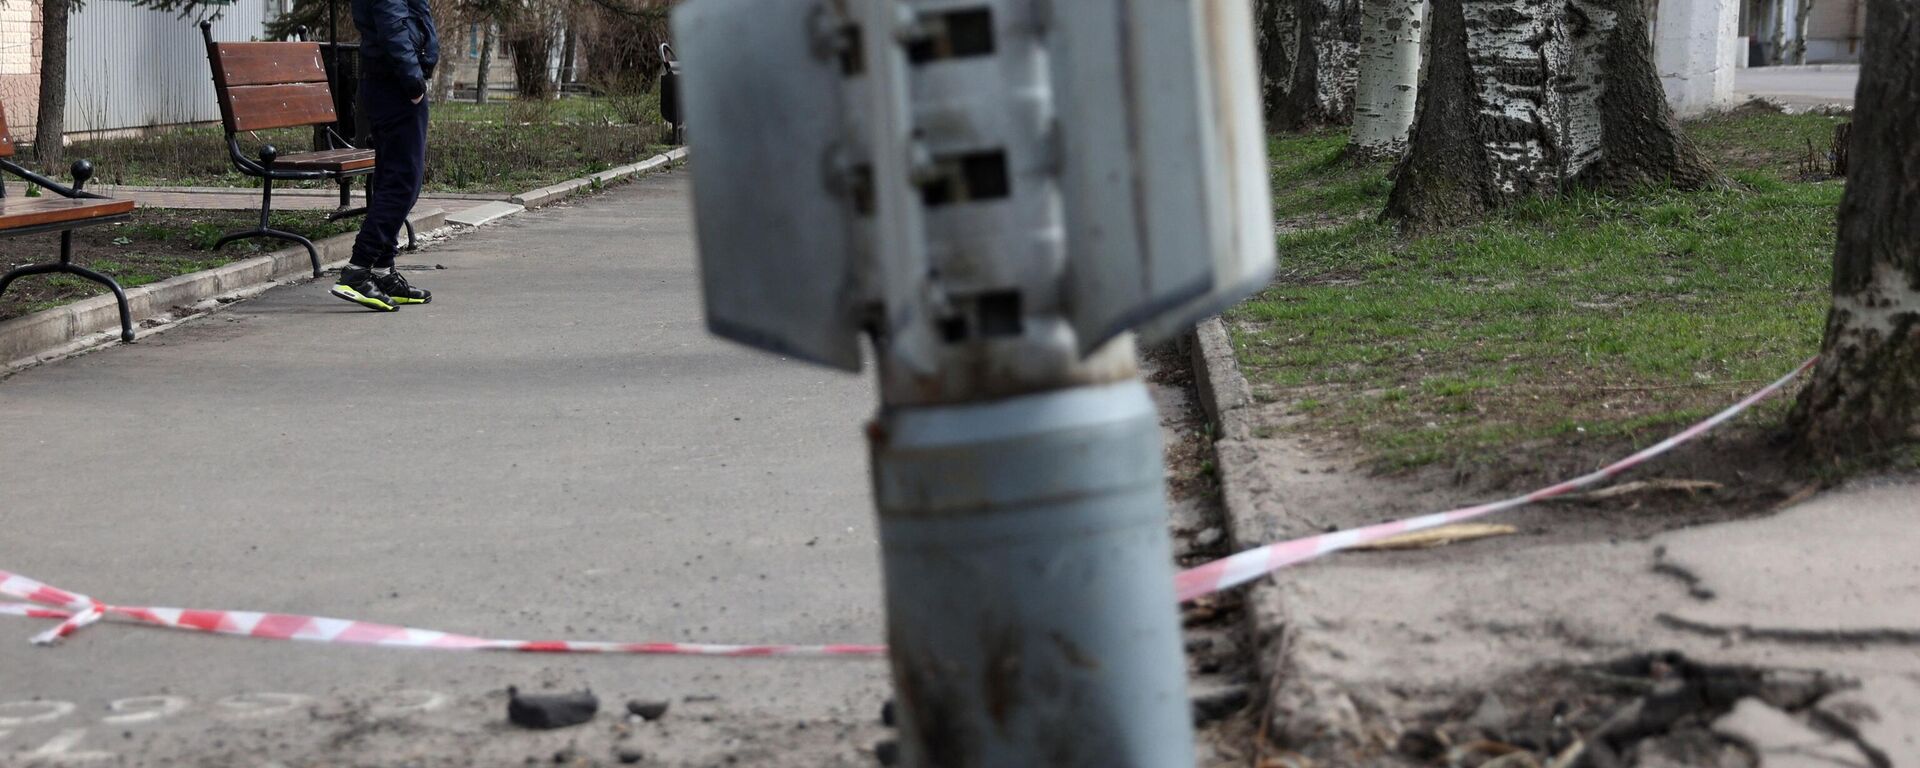 A man walks past an unexploded tail section of a 300mm rocket which appear to contained cluster bombs launched from a BM-30 Smerch multiple rocket launcher embedded in the ground after shelling in Lisichansk, LPR on April 11, 2022 - Sputnik International, 1920, 30.08.2022